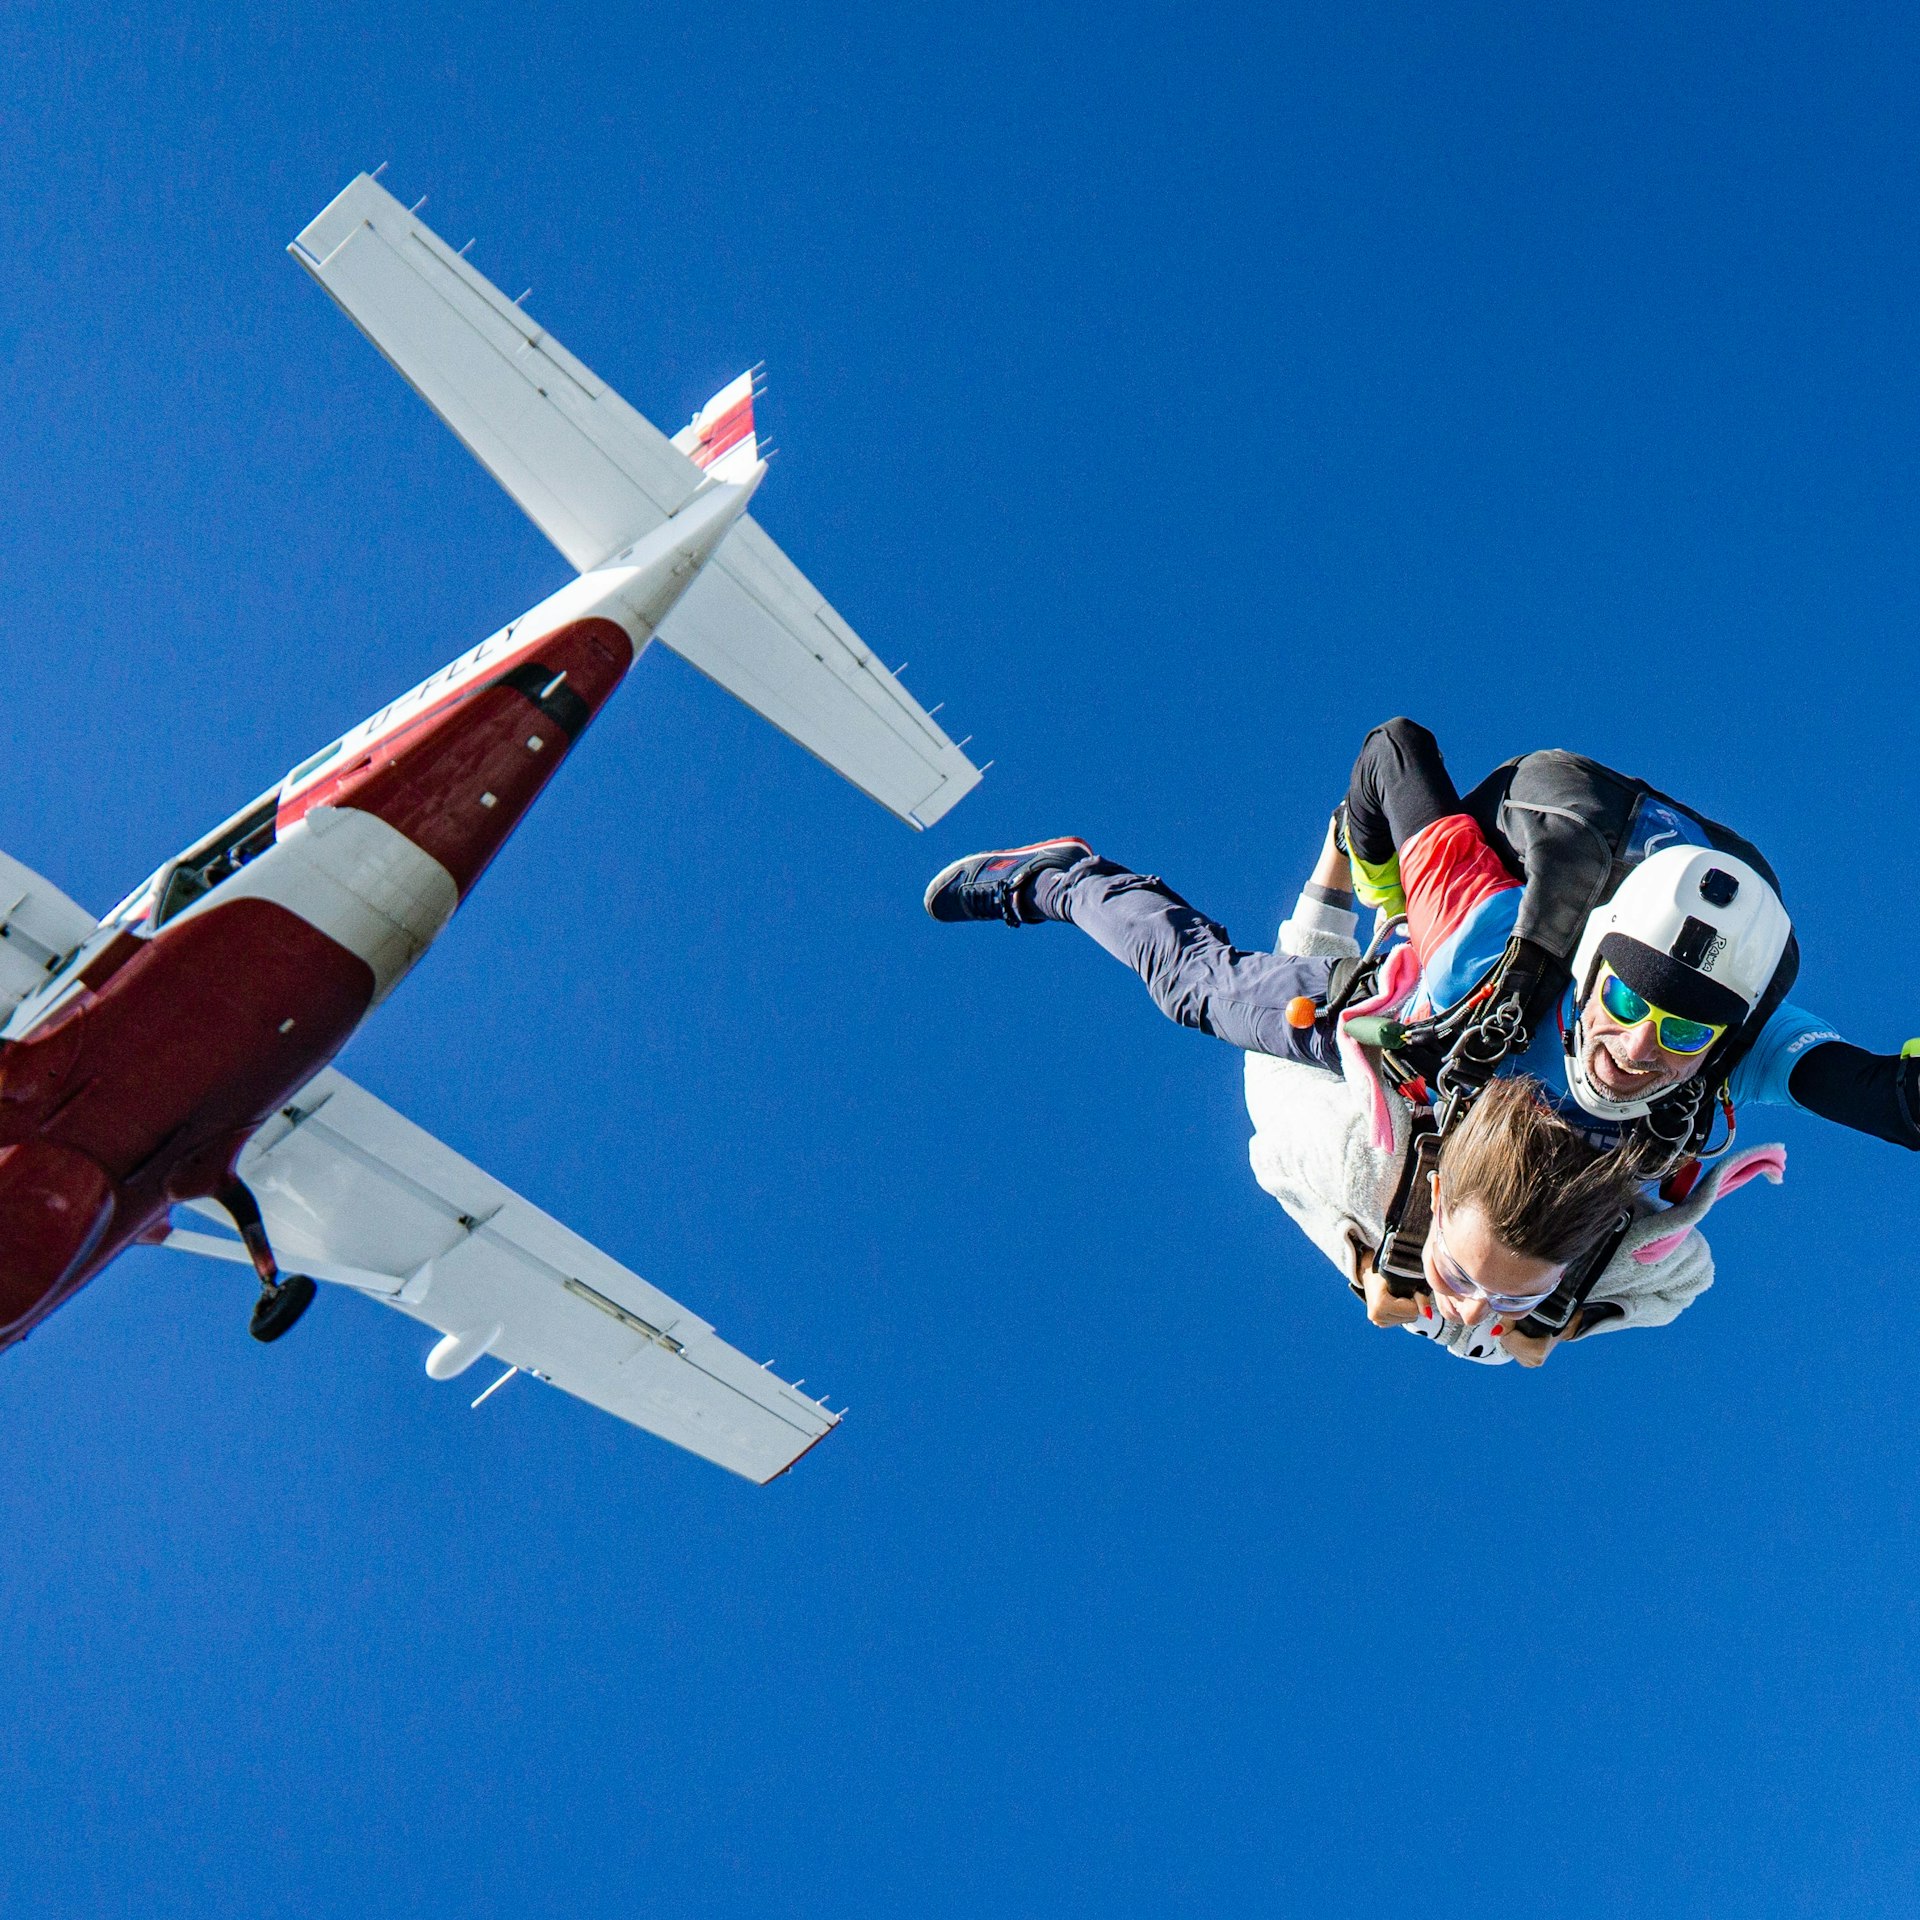 Skydiving 101: What Is The Average Skydiving Height?